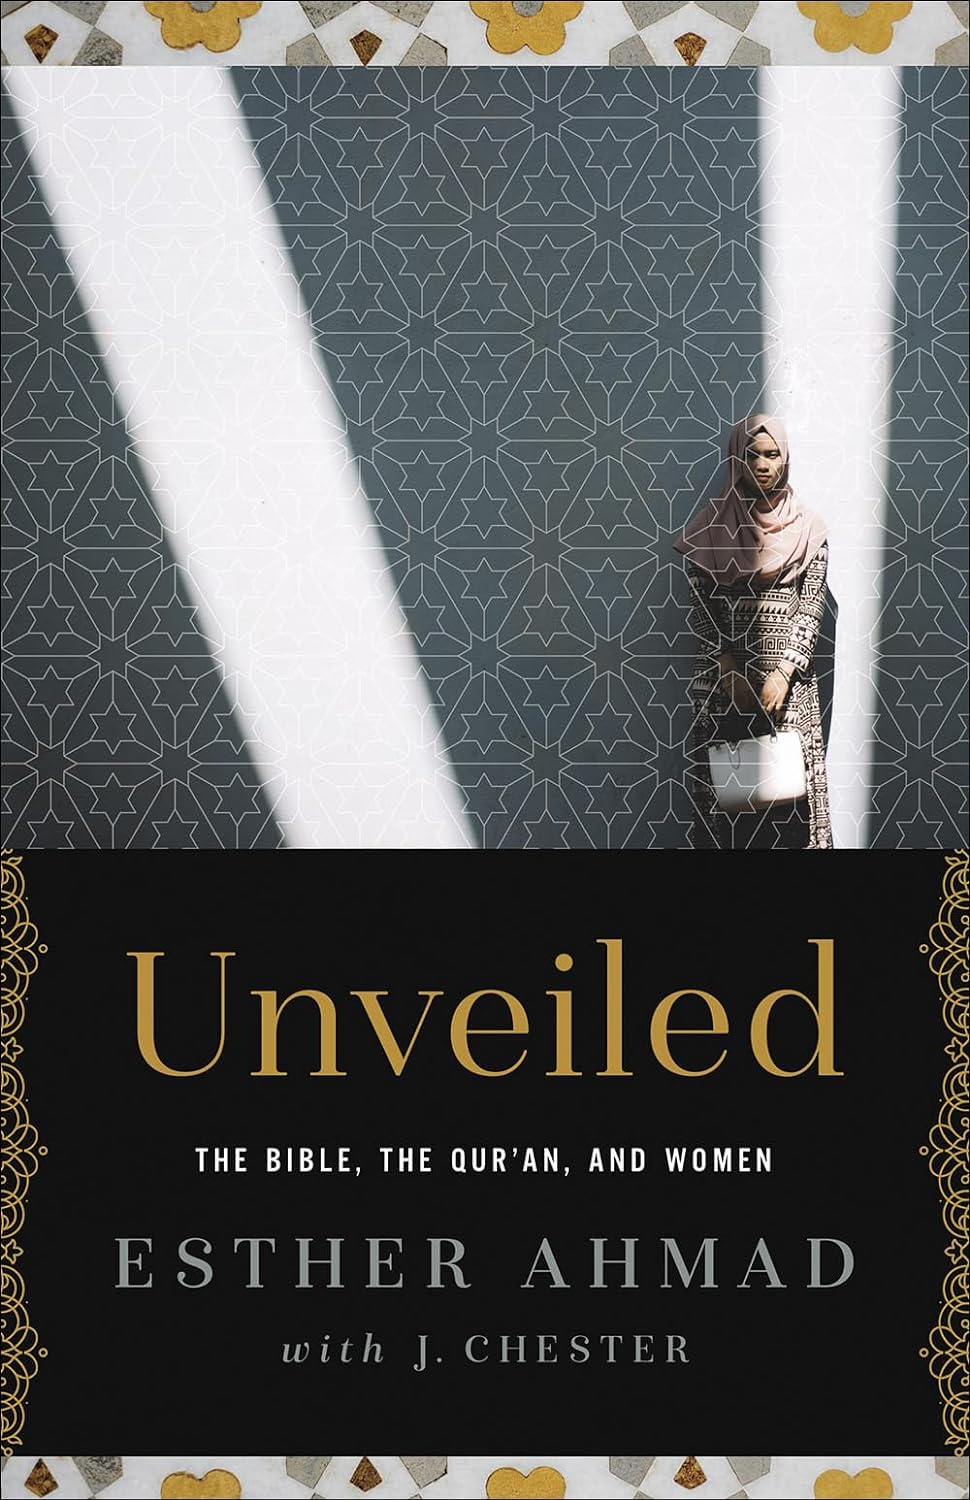 Unveiled: The Bible, The Qur'an, And Women - Esther Ahmad